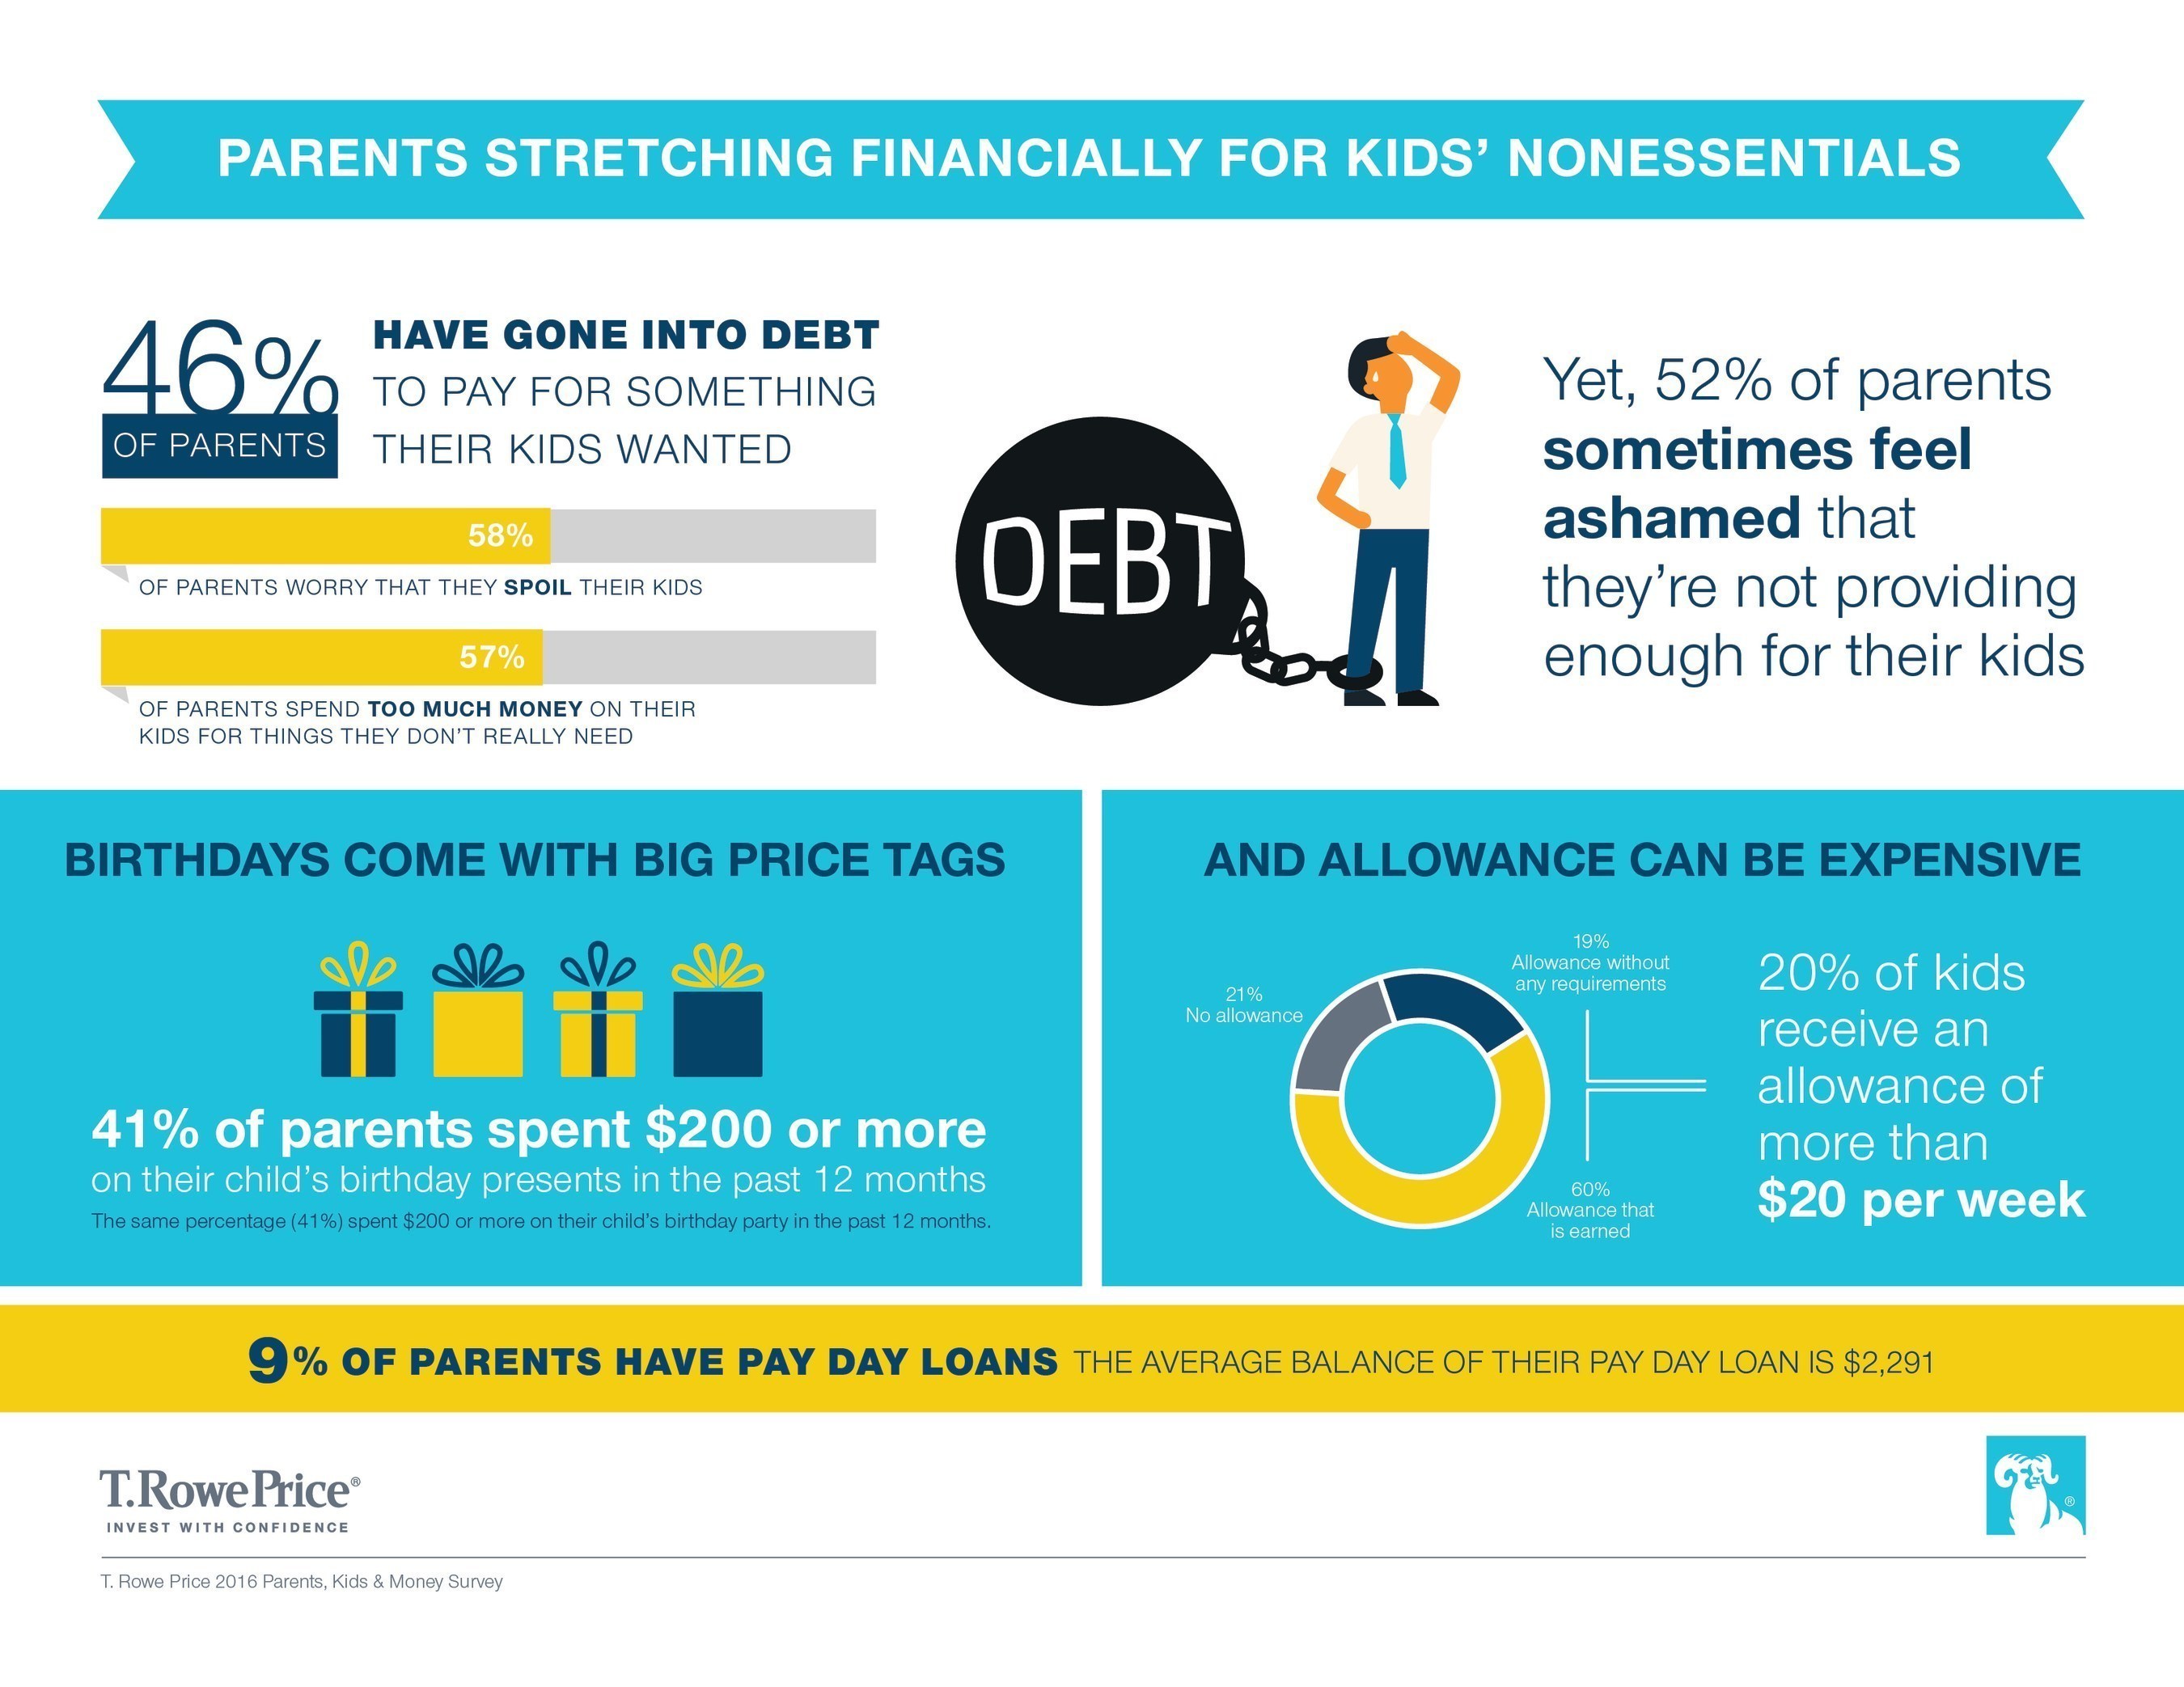 Parents Stretching Financially For Kids' Nonessentials